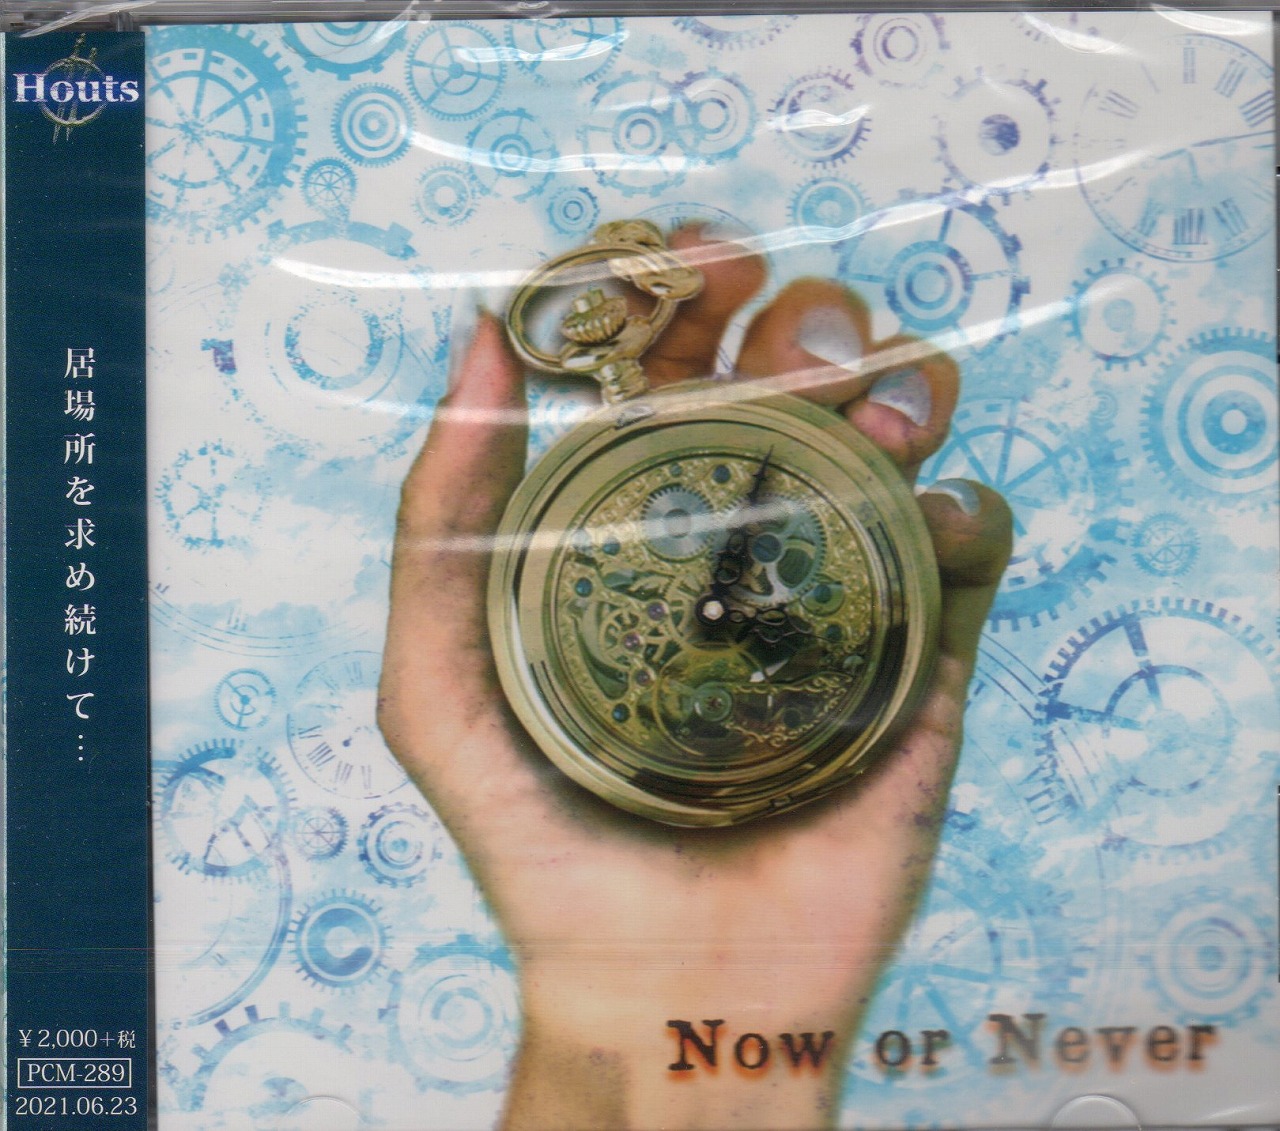 Houts の CD Now or Never